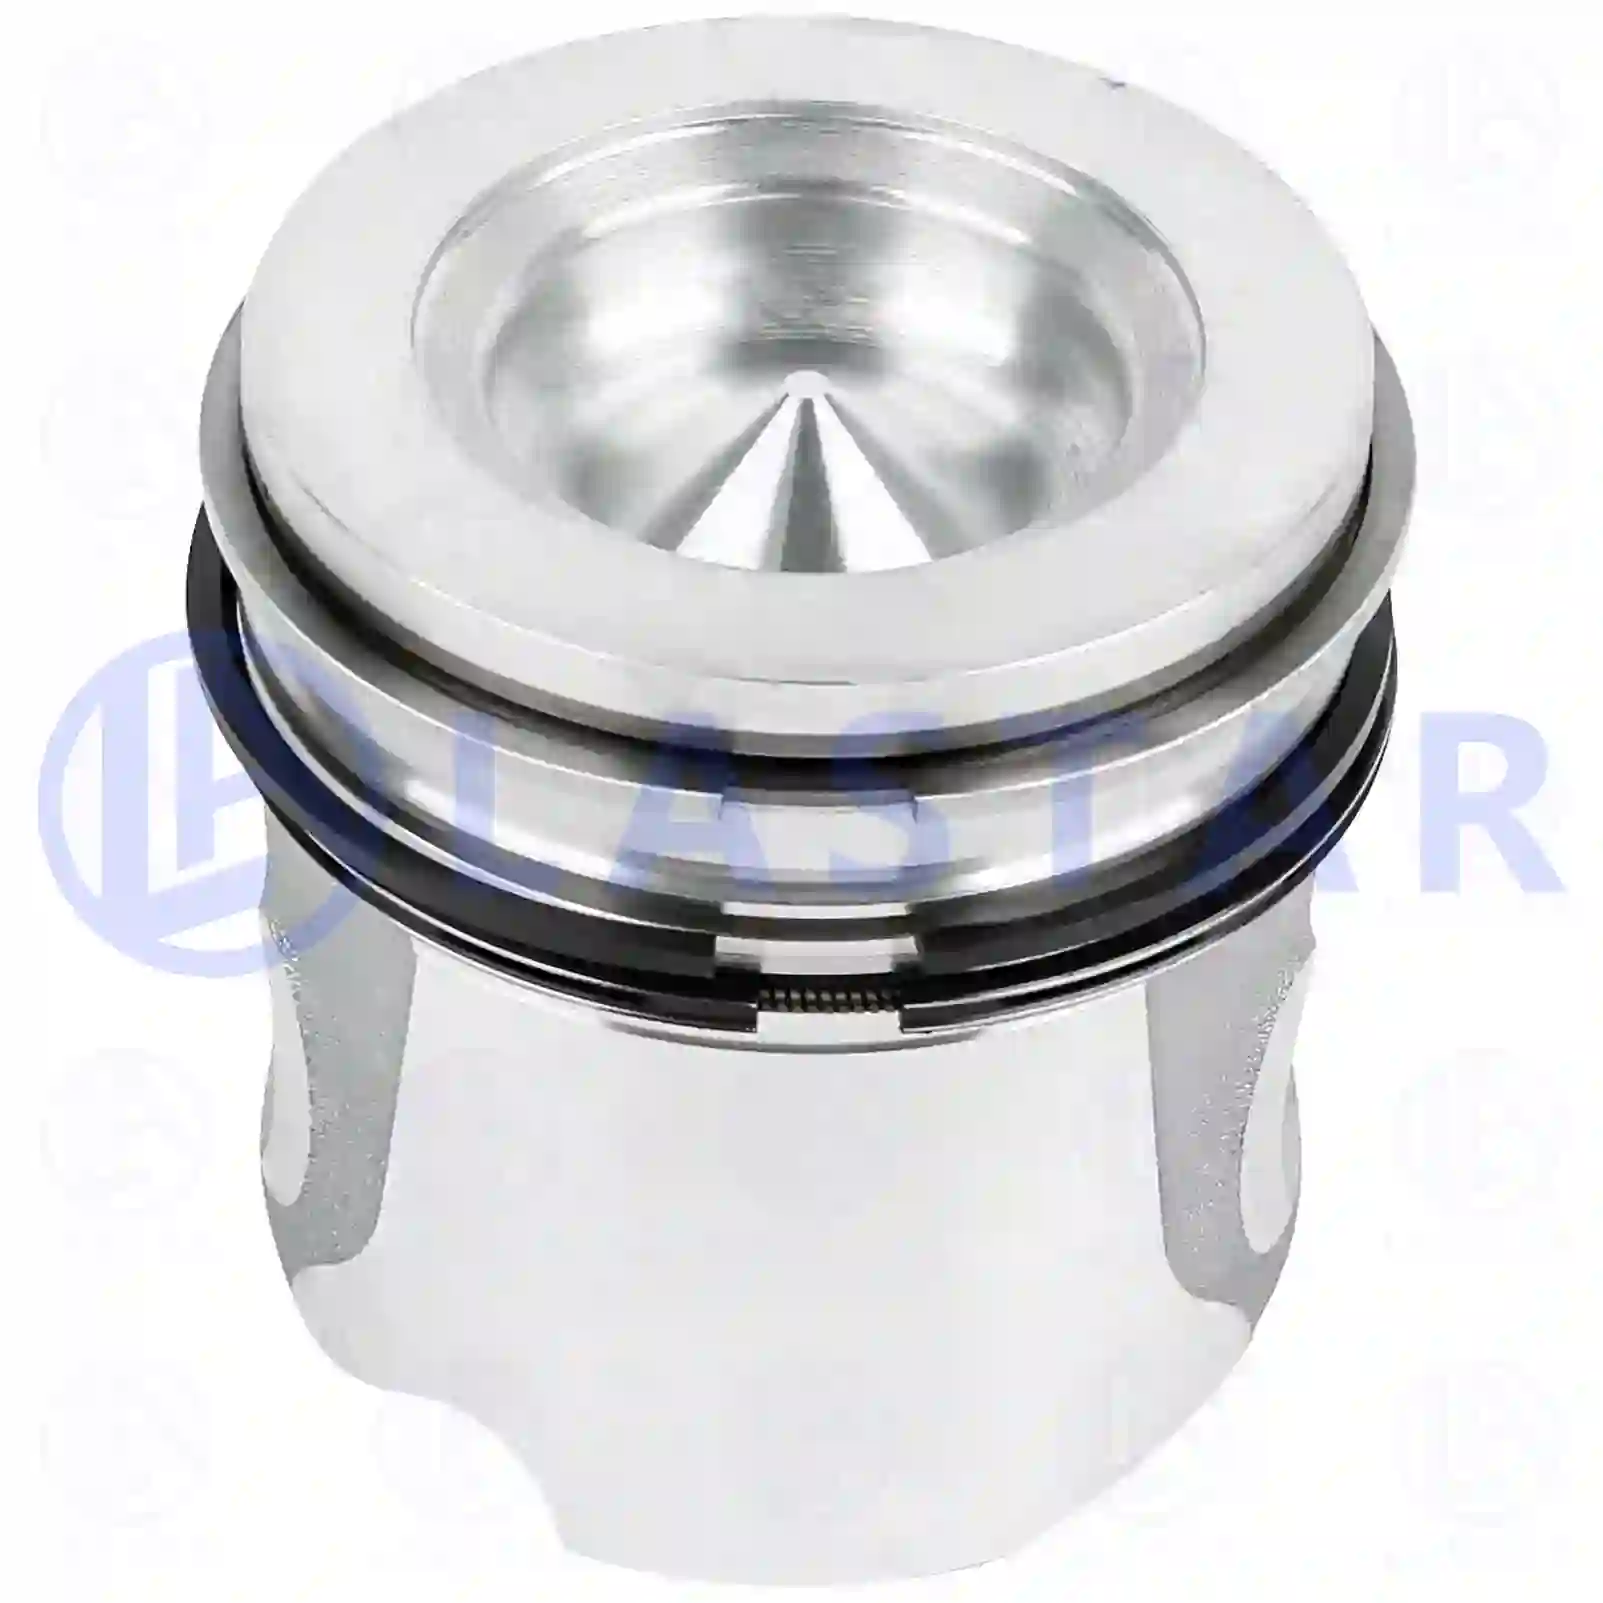 Piston, complete with rings, 77702489, 02996853, 504017243, 02992558, 02994011, 02995671, 02996098, 02996316, 02996853, 04897935, 2992558, 2995671, 2996098, 2996316, 2996853, 4897935, 504017243 ||  77702489 Lastar Spare Part | Truck Spare Parts, Auotomotive Spare Parts Piston, complete with rings, 77702489, 02996853, 504017243, 02992558, 02994011, 02995671, 02996098, 02996316, 02996853, 04897935, 2992558, 2995671, 2996098, 2996316, 2996853, 4897935, 504017243 ||  77702489 Lastar Spare Part | Truck Spare Parts, Auotomotive Spare Parts